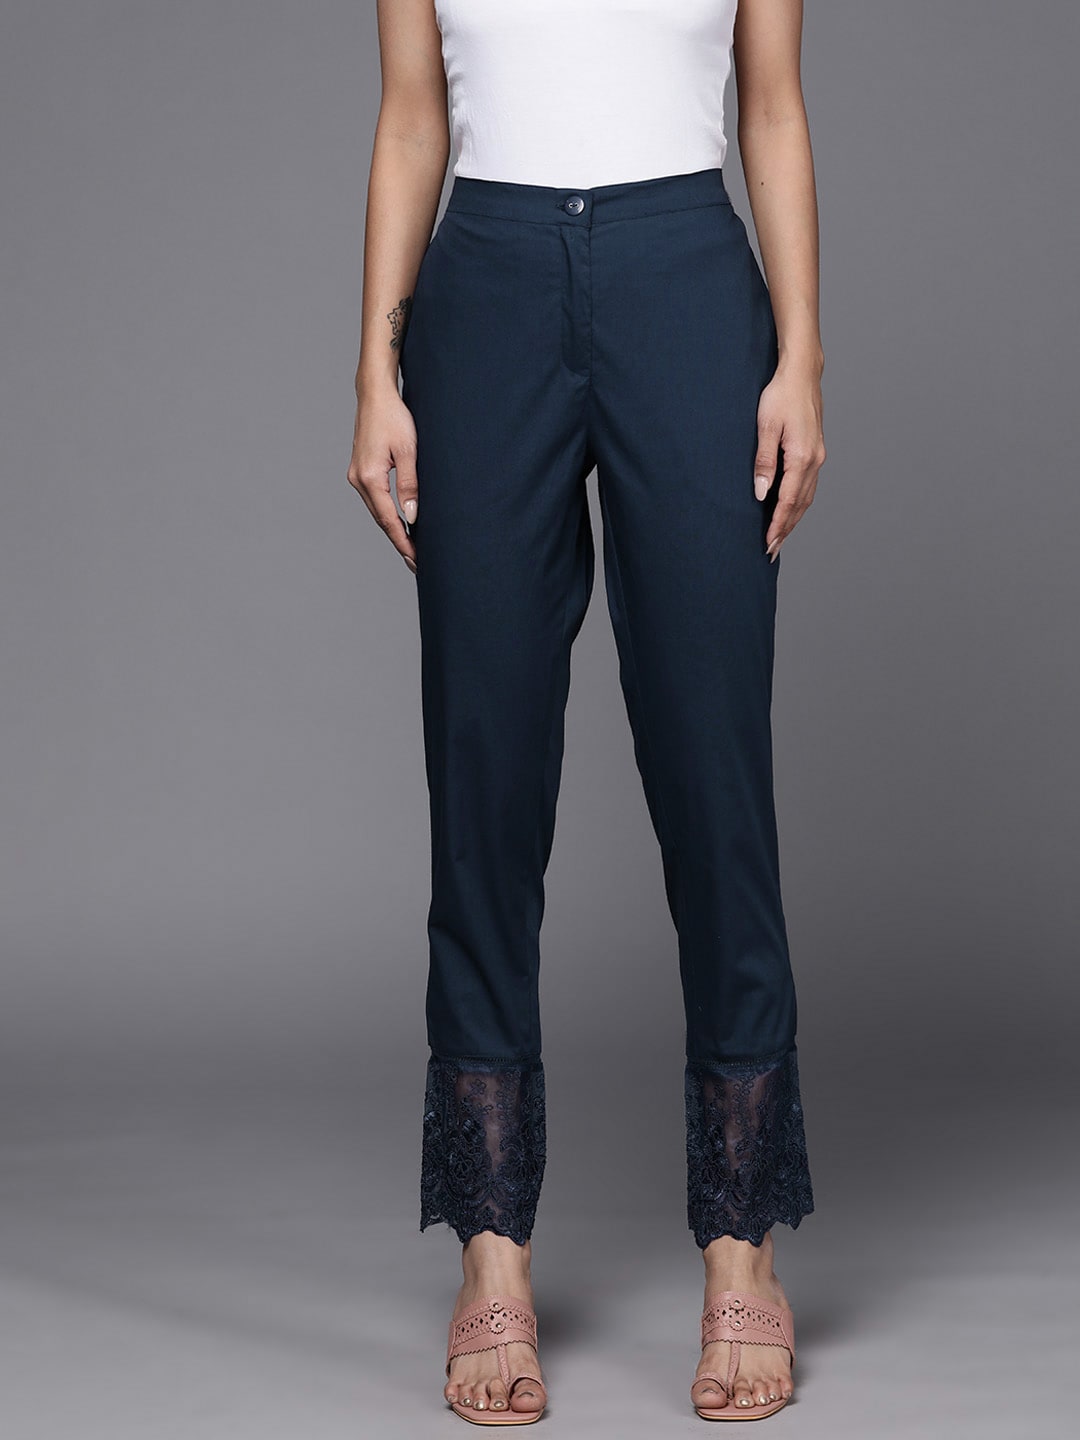 Libas Women Navy Blue Pure Cotton Trousers with Lace Details at Hem Price in India